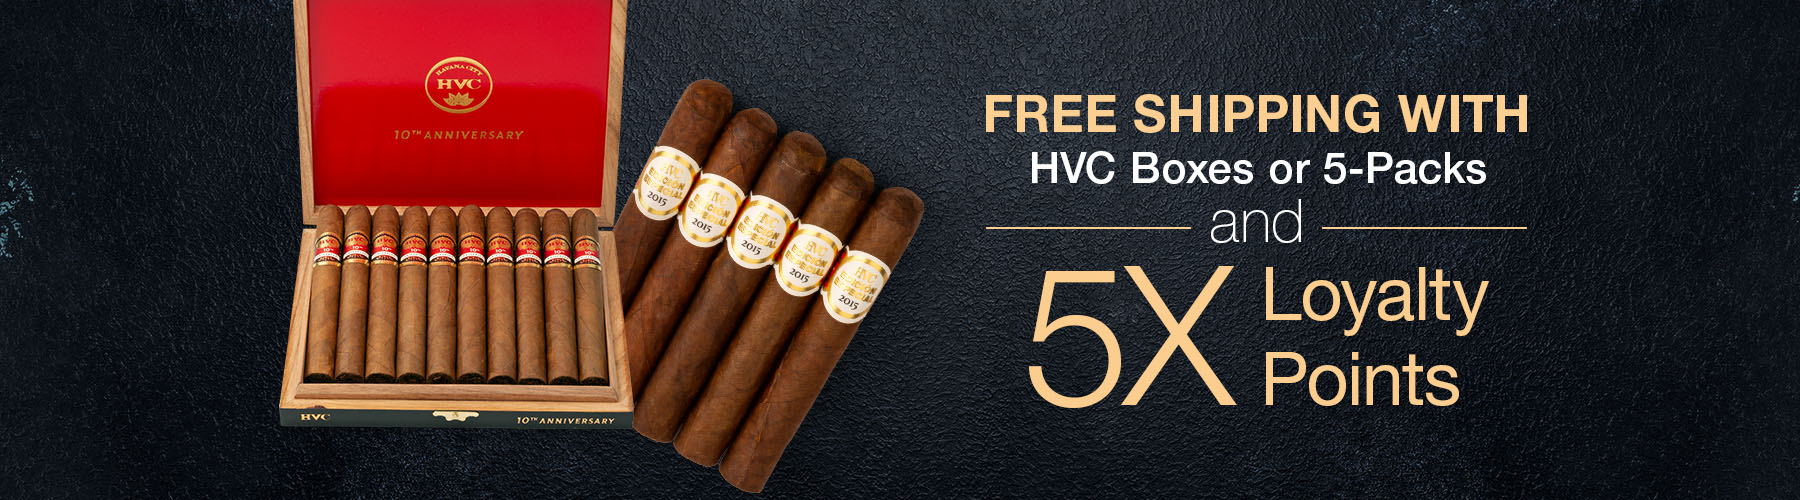 Free Shipping with HVC boxes or 5-packs & 5X Loyalty Points